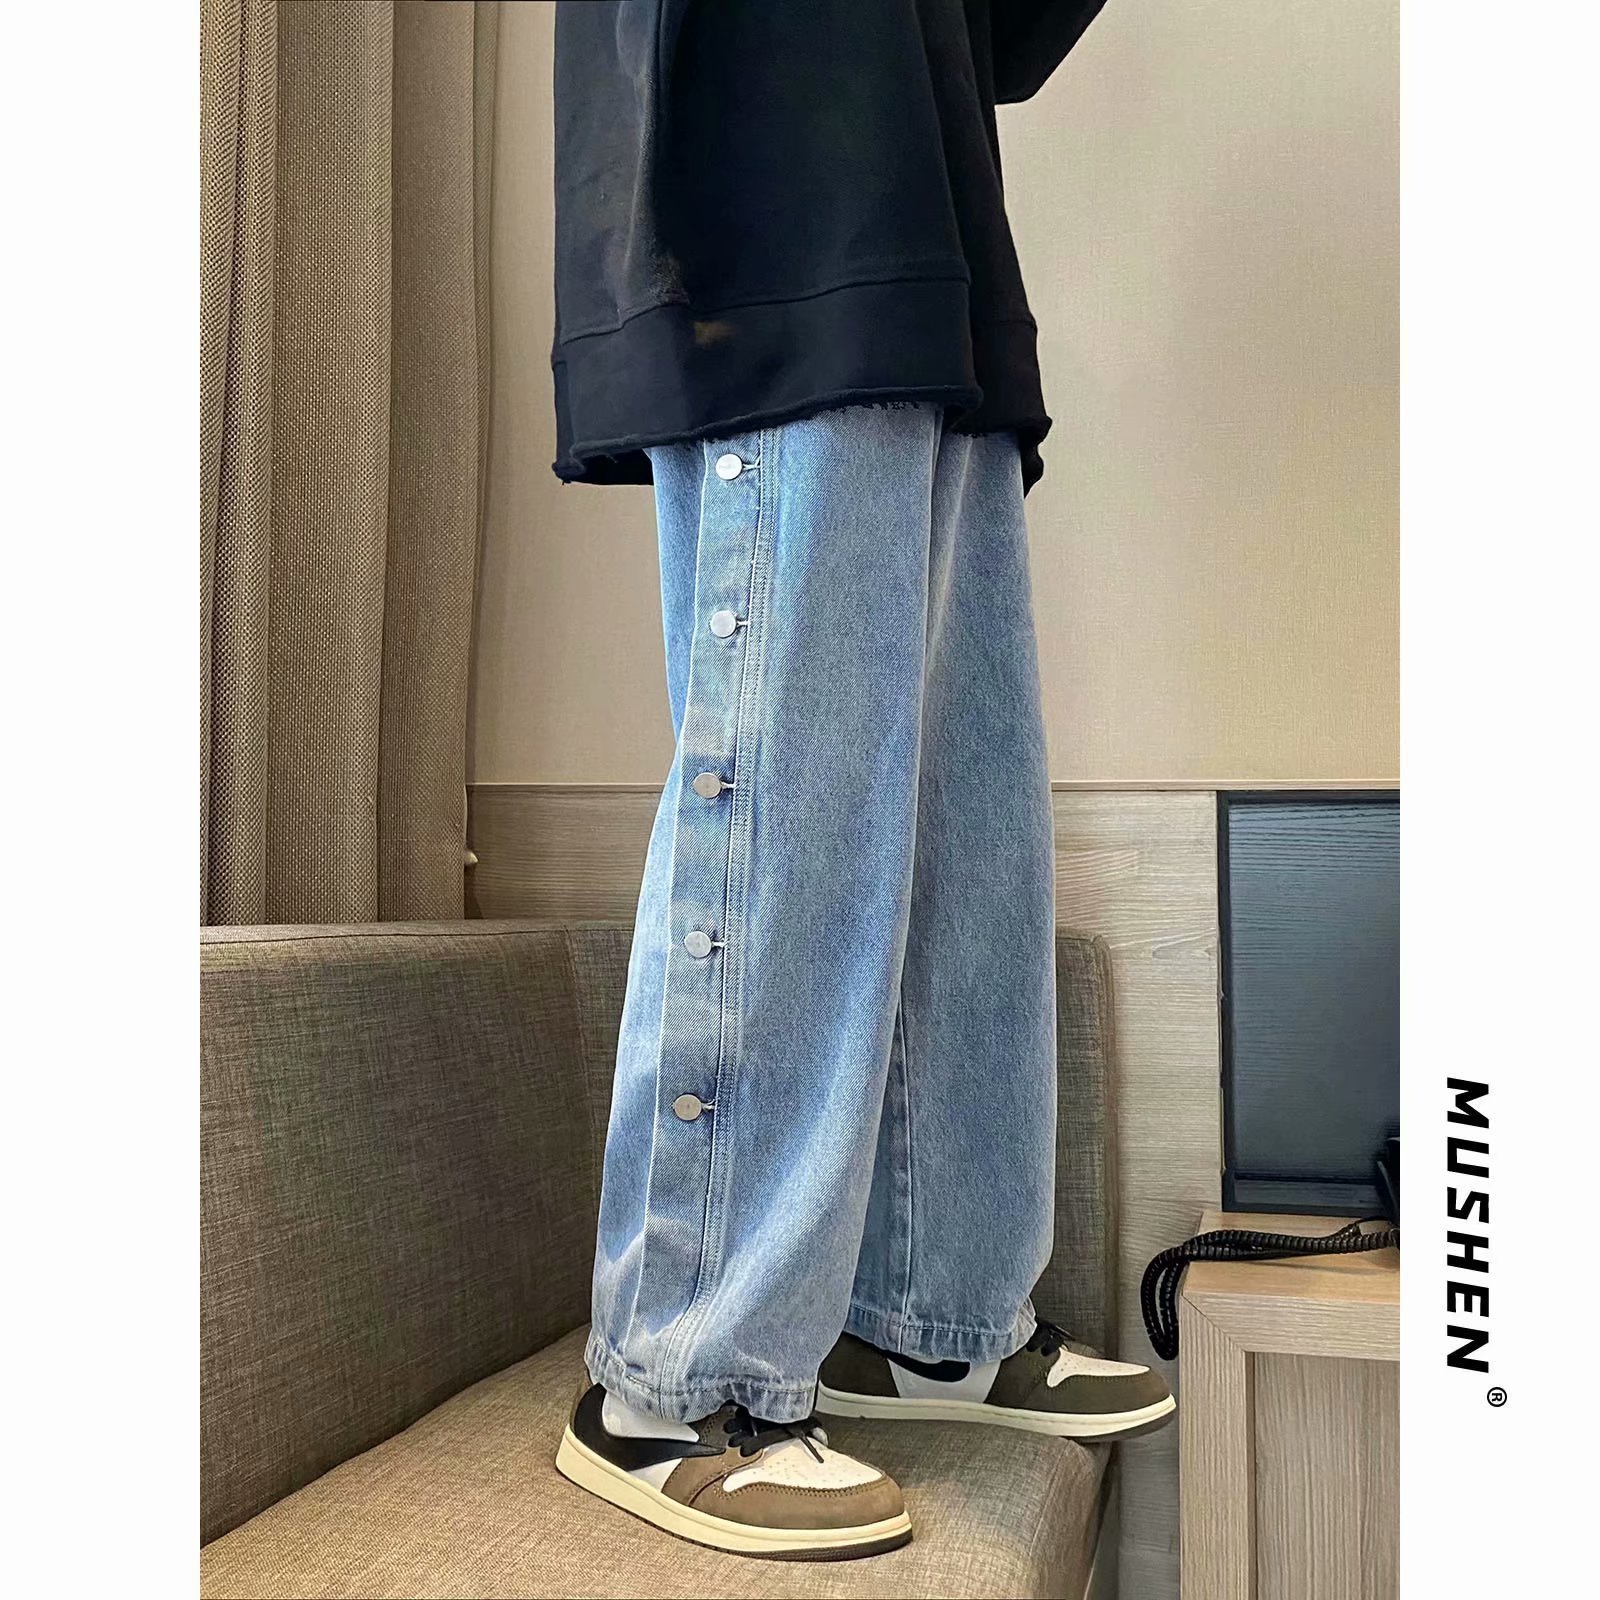 Breasted Jeans Men's Fashion Brand Straight Korean Style Loose Student Trendy Ins Wide Leg Leisure Daddy Pants Delivery